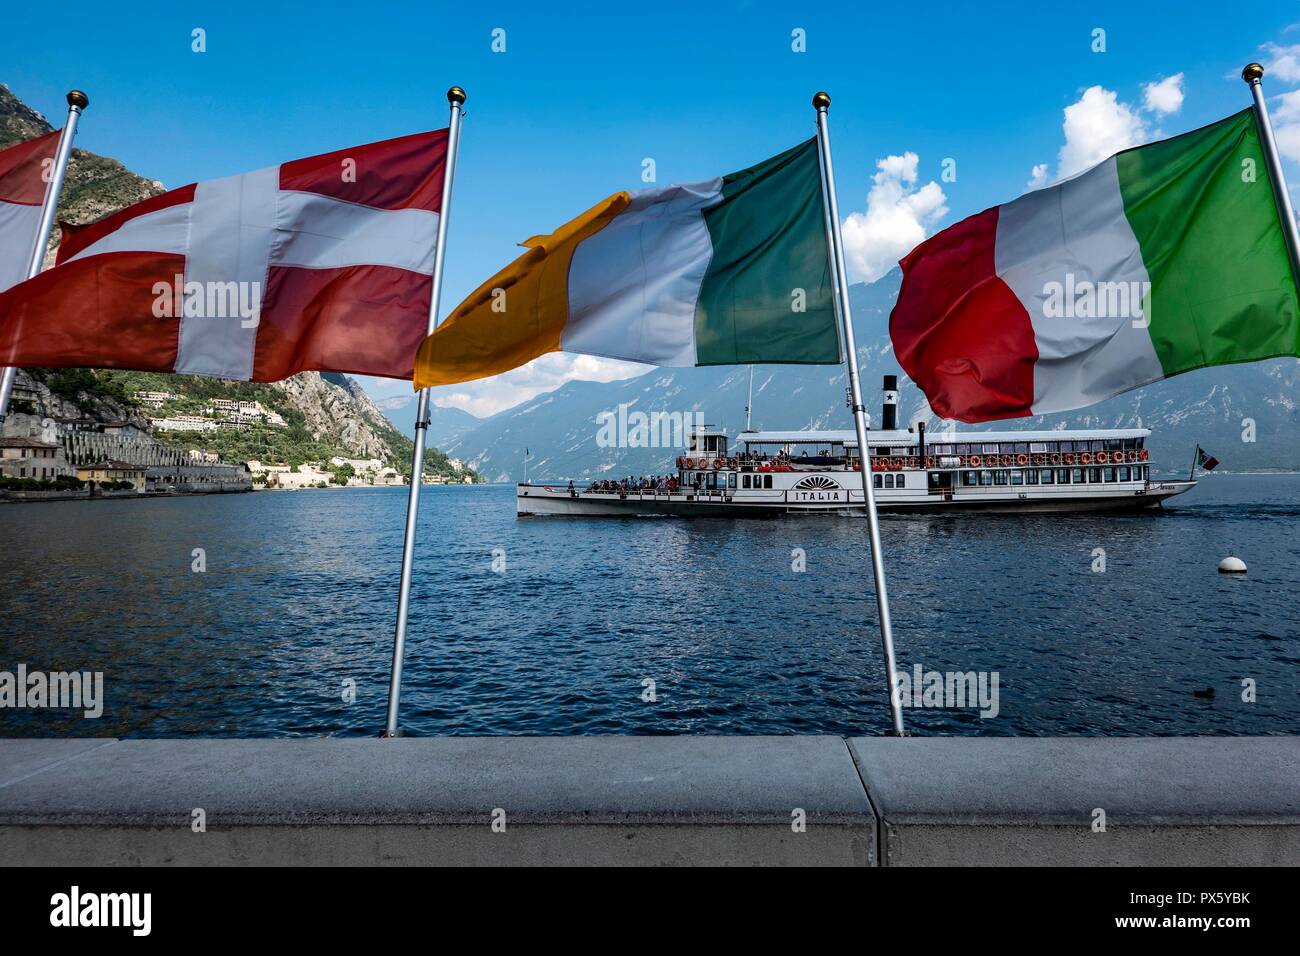 Italy, Garda-Lake, Limone, 09.05.2018. historic paddle steamer Italia approaching the village of Limone with flags of Denmark, Ireland and Italy in fo Stock Photo